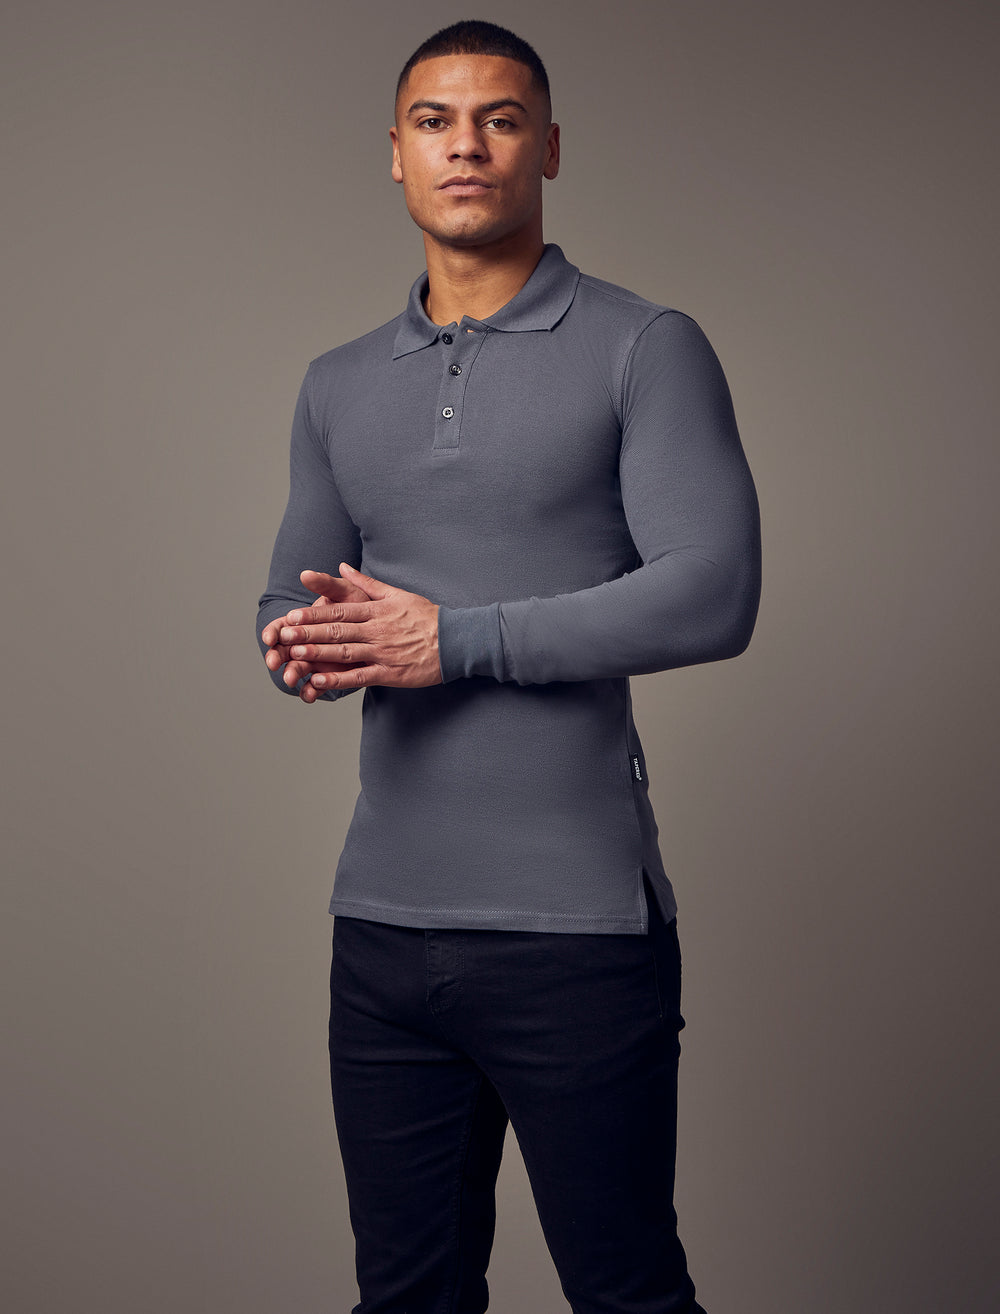  Long-sleeve, dark grey, tapered-fit polo shirt designed for a muscle-fit appearance, offering a sleek and comfortable silhouette.